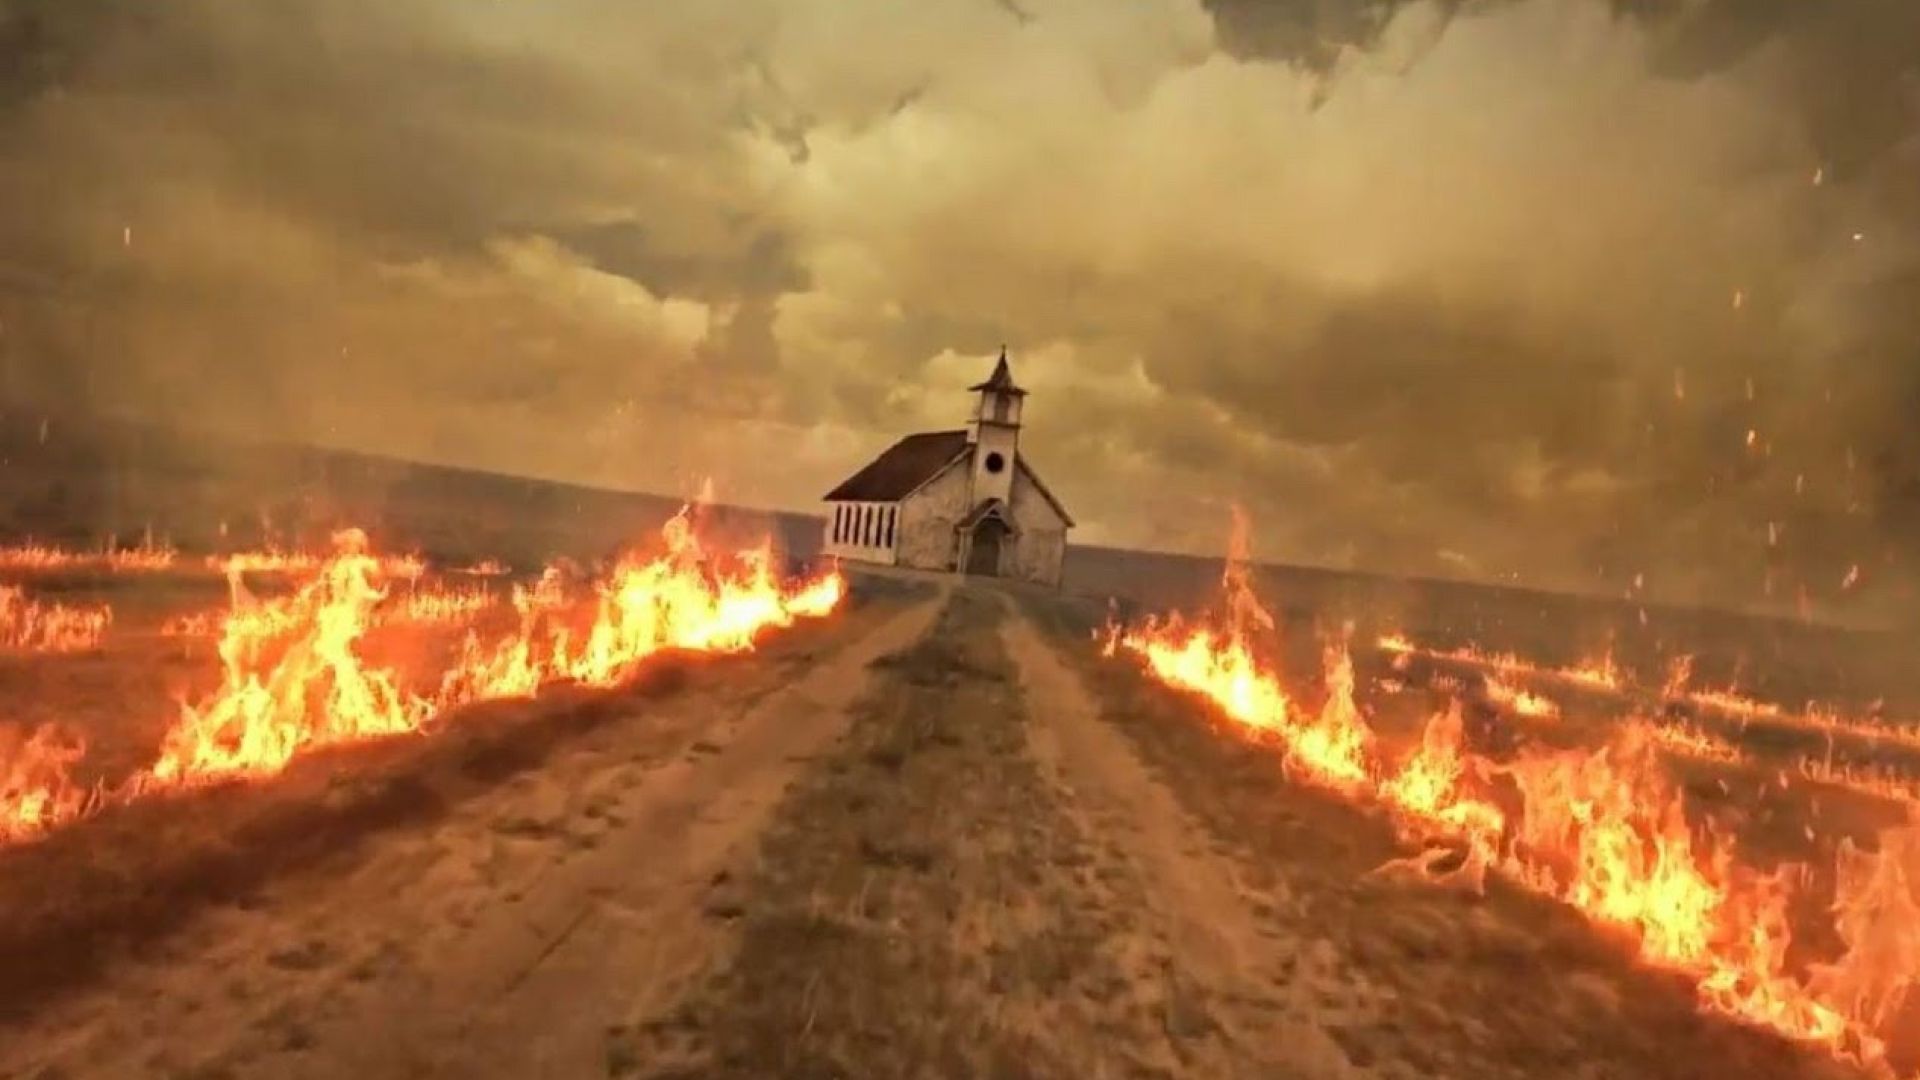 Follow the burning road in the new promo for AMC&#039;s &#039;Preacher